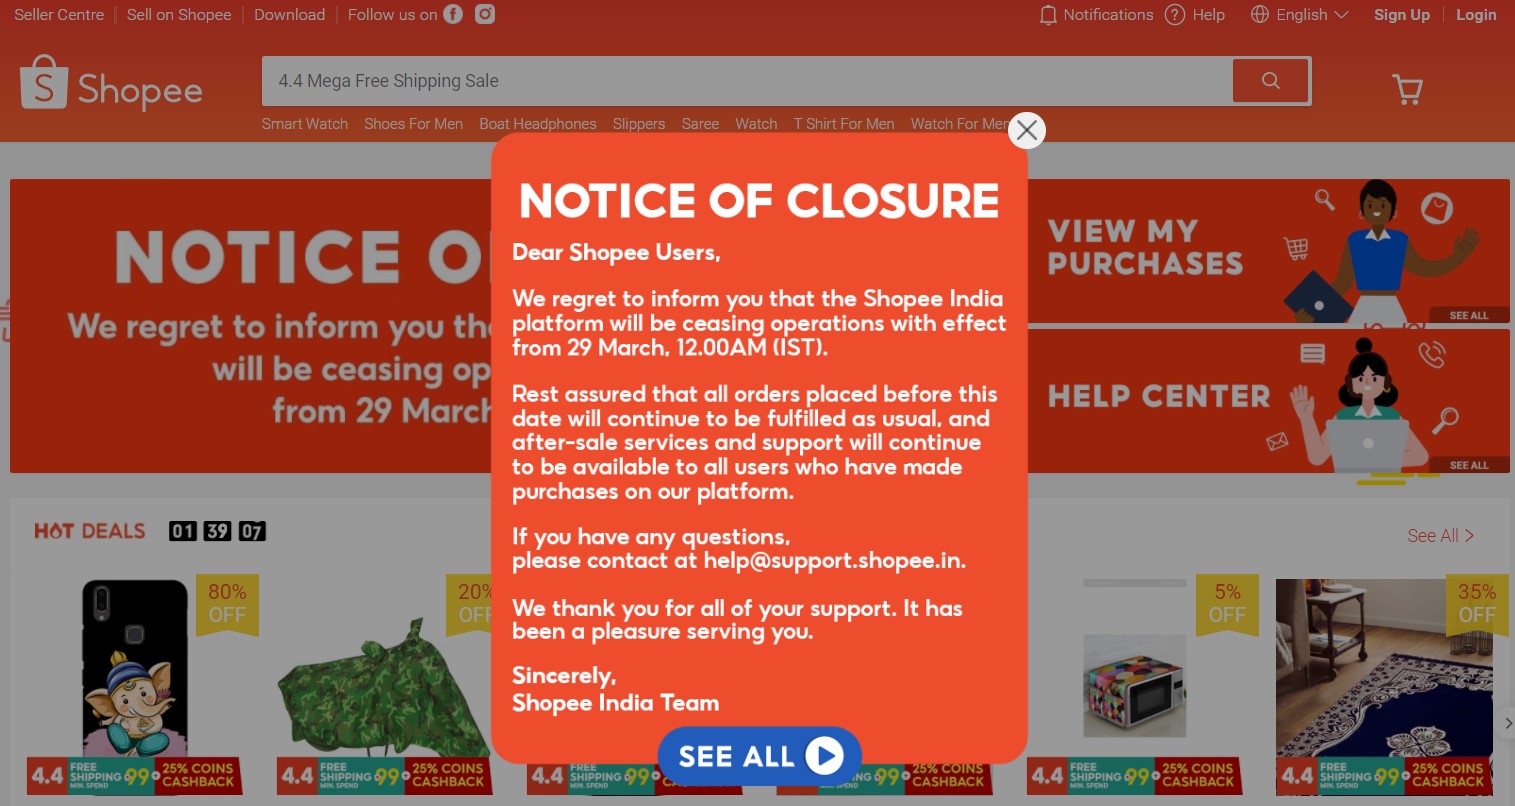 E-commerce platform Shopee To Close Its Operations In India Amid “Global Market Uncertainties”